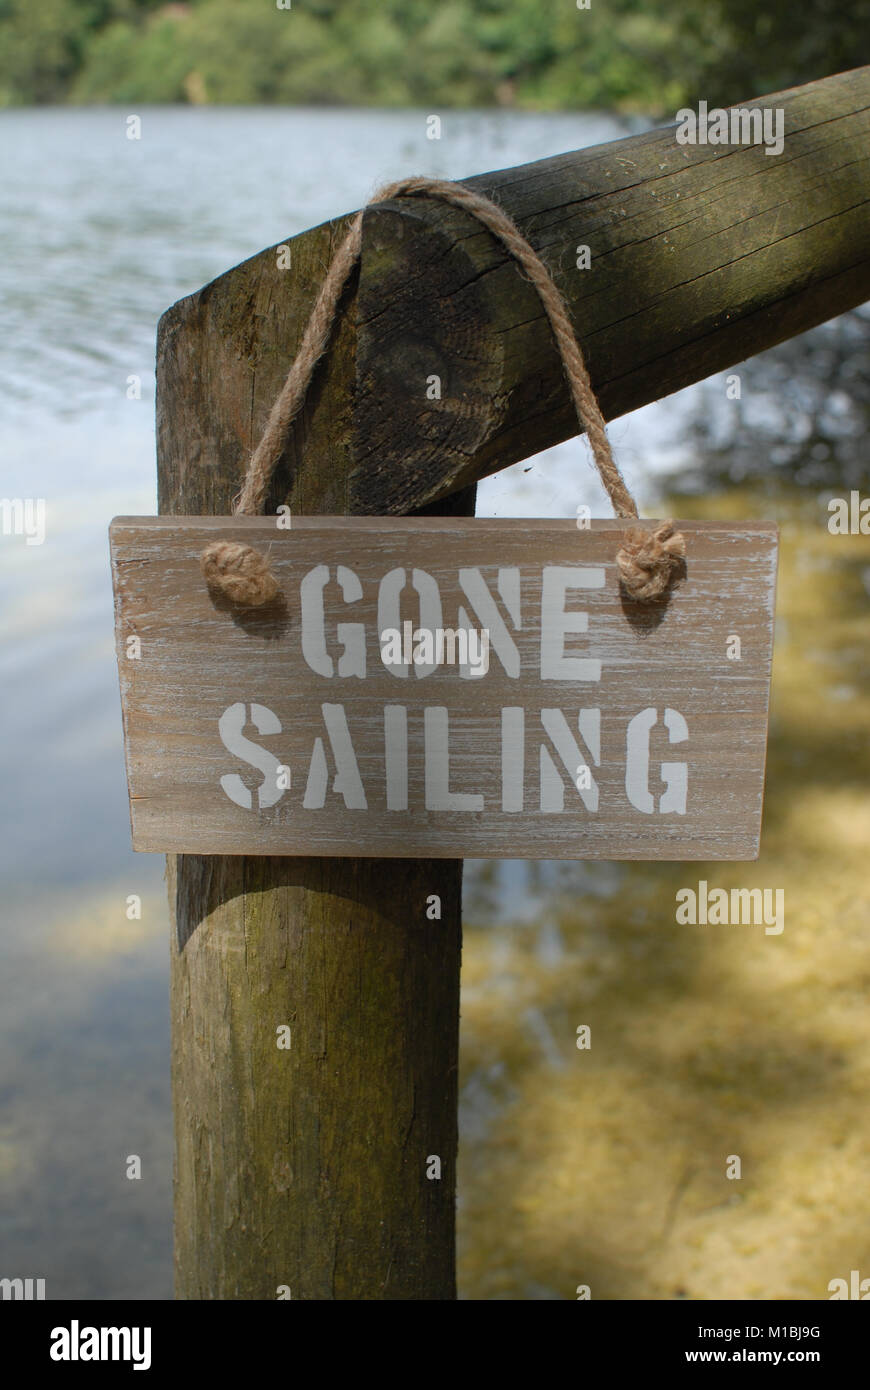 Gone Sailing - a driftwood sign hanging on a wooden fence next to a lake. Stock Photo